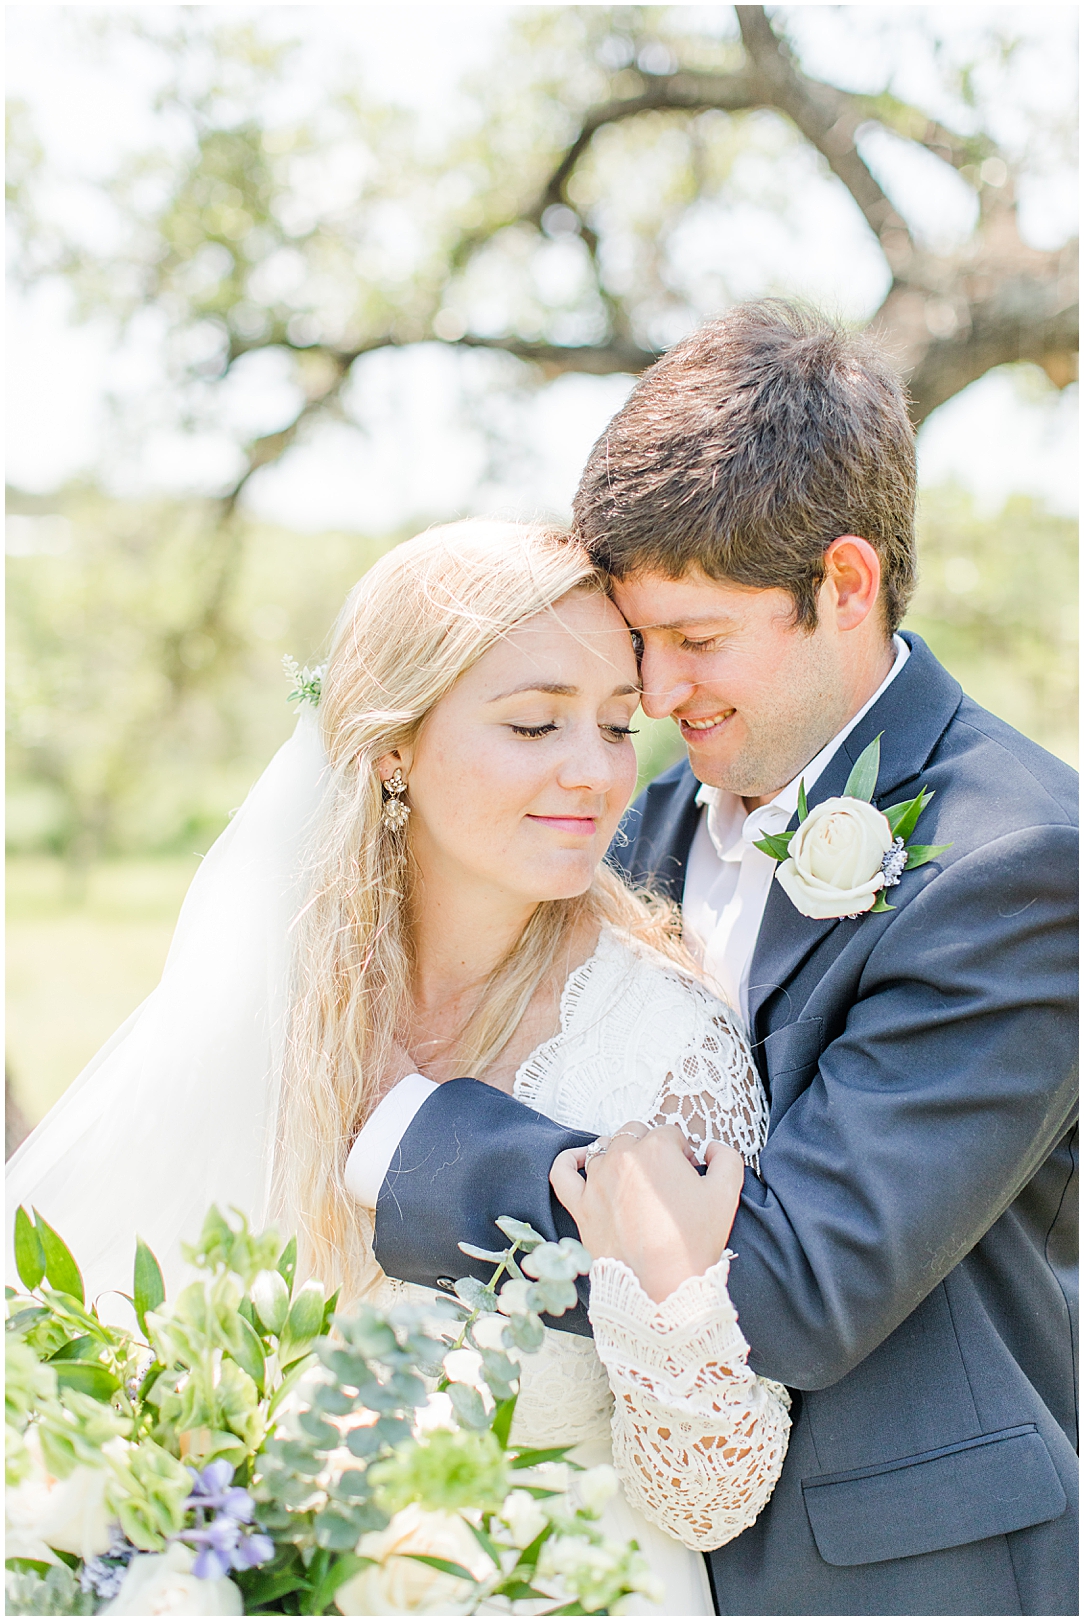 An Intimate elopement for two in Dripping Springs Texas by Allison Jeffers Photography 0057